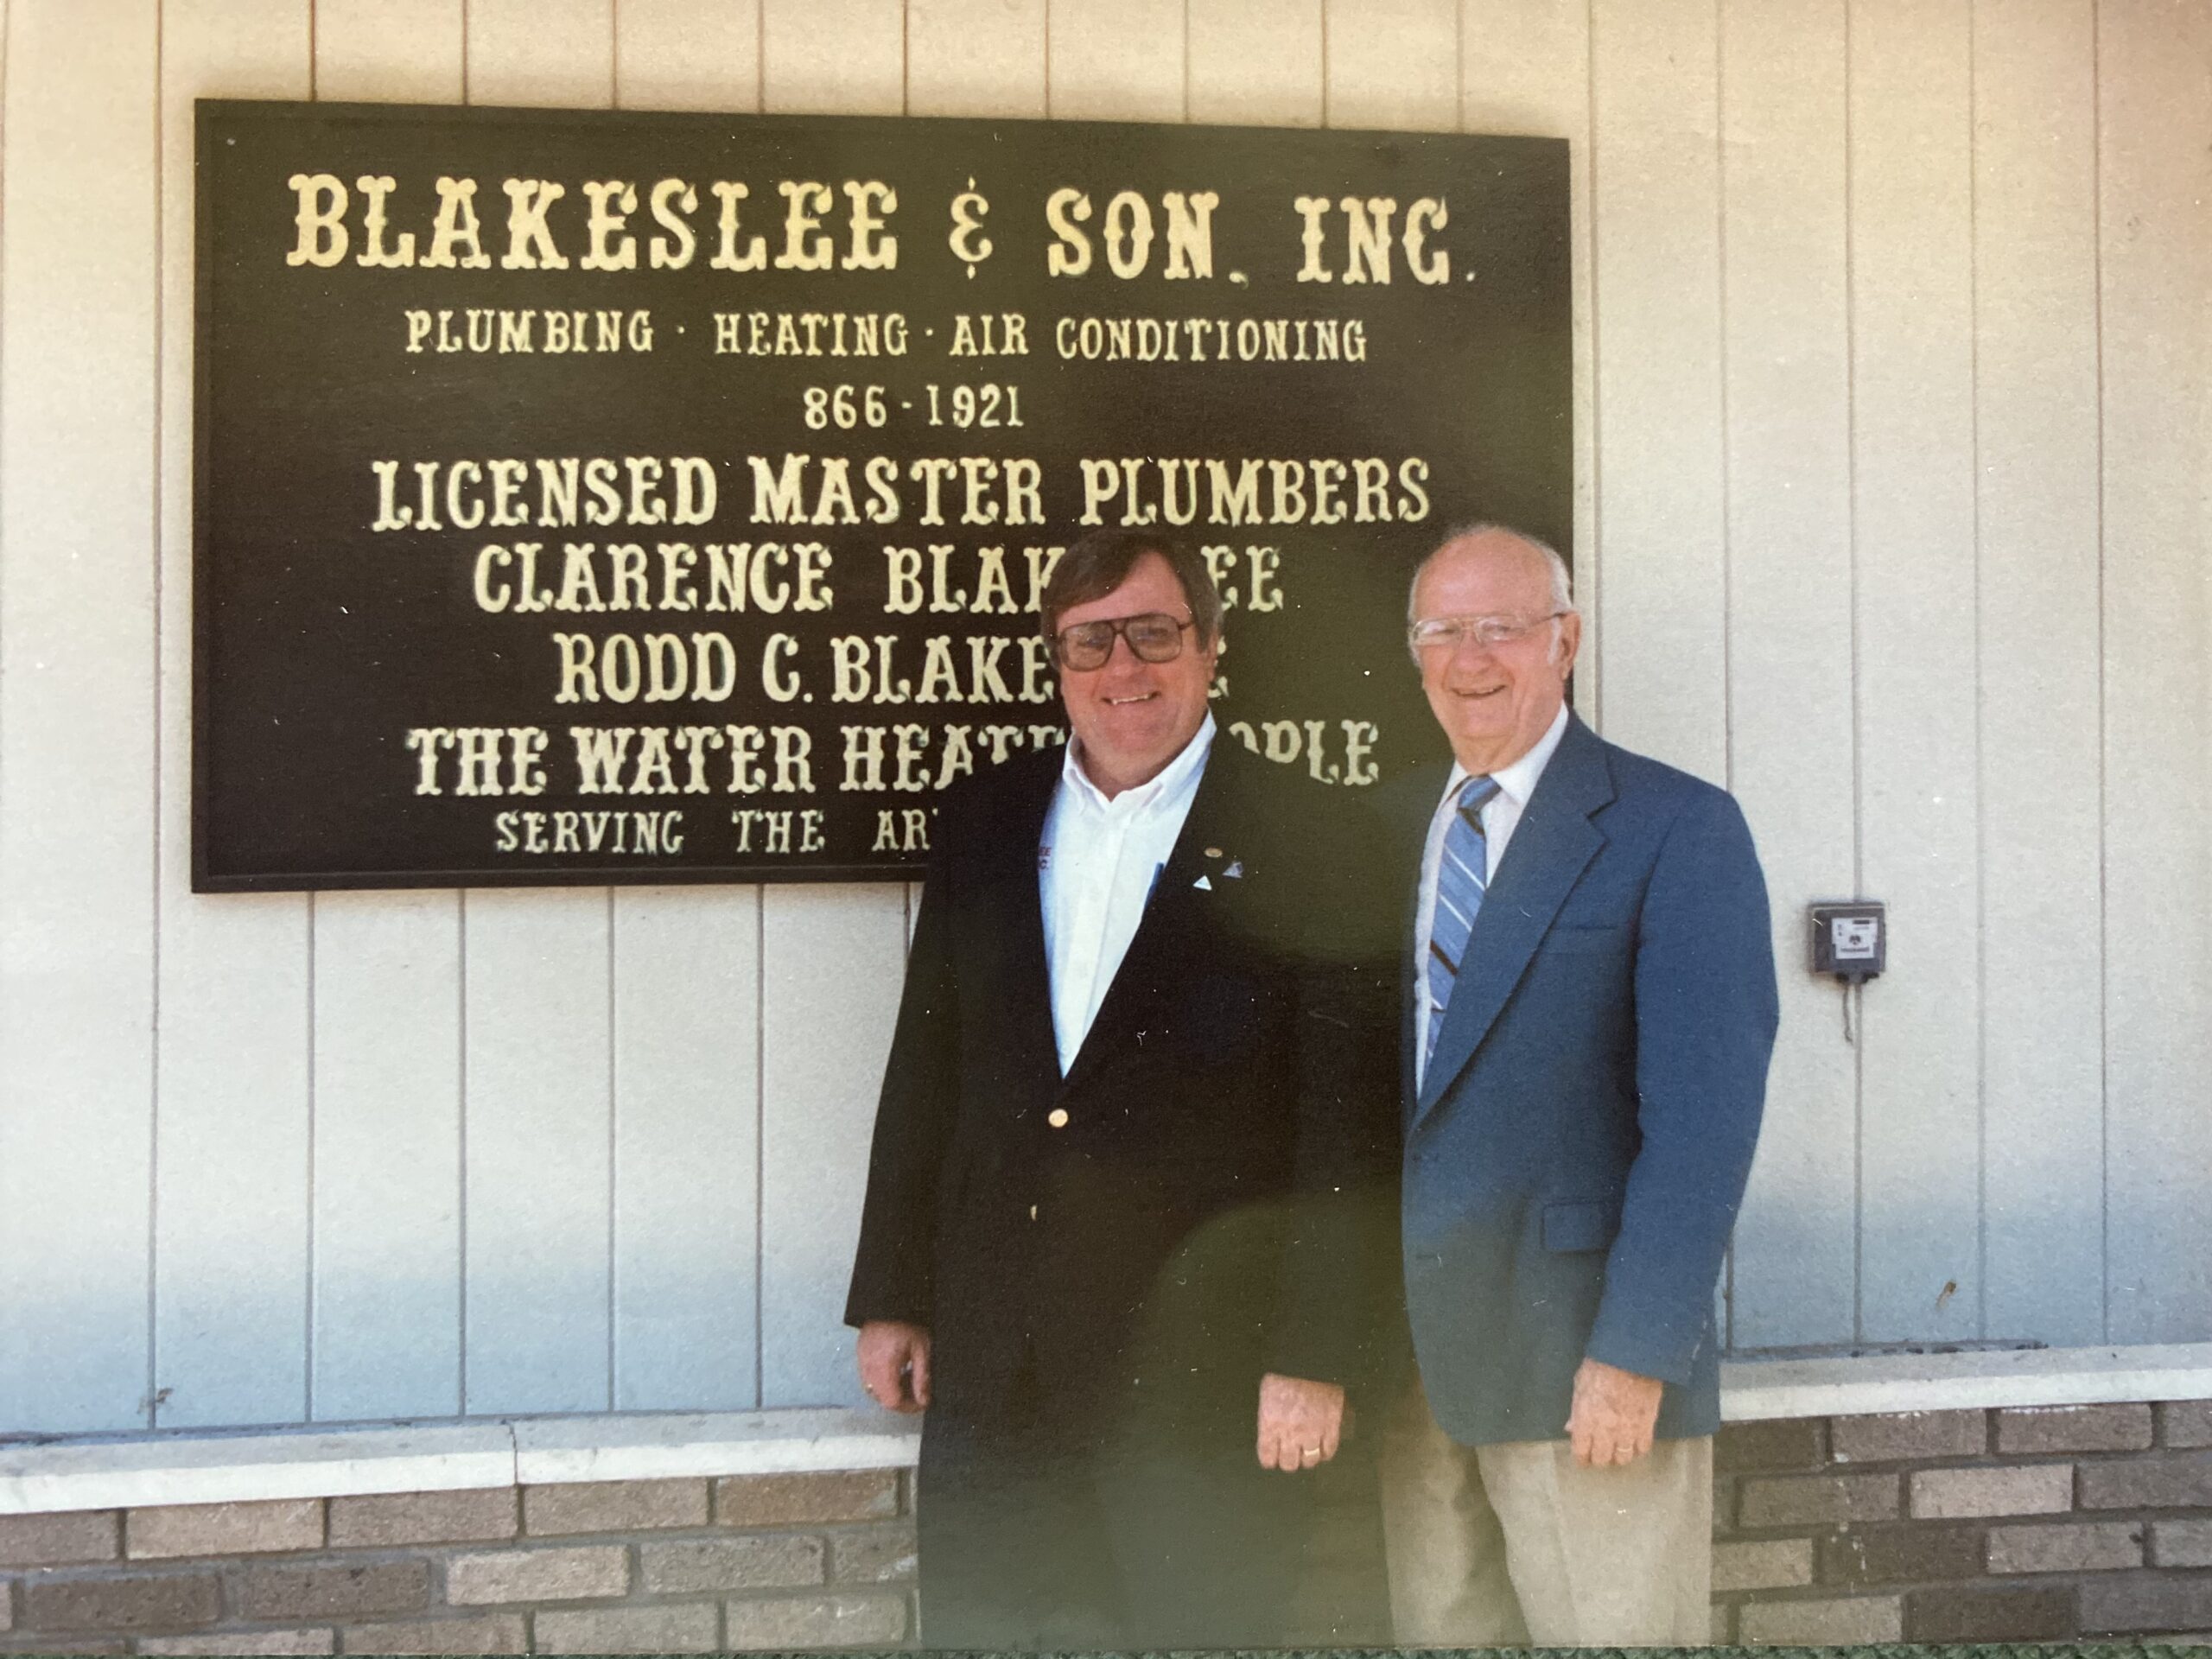 Blakeslee & Son founder Clarence Blakeslee and his son Rodd Blakeslee stand in front of the company's business sign.